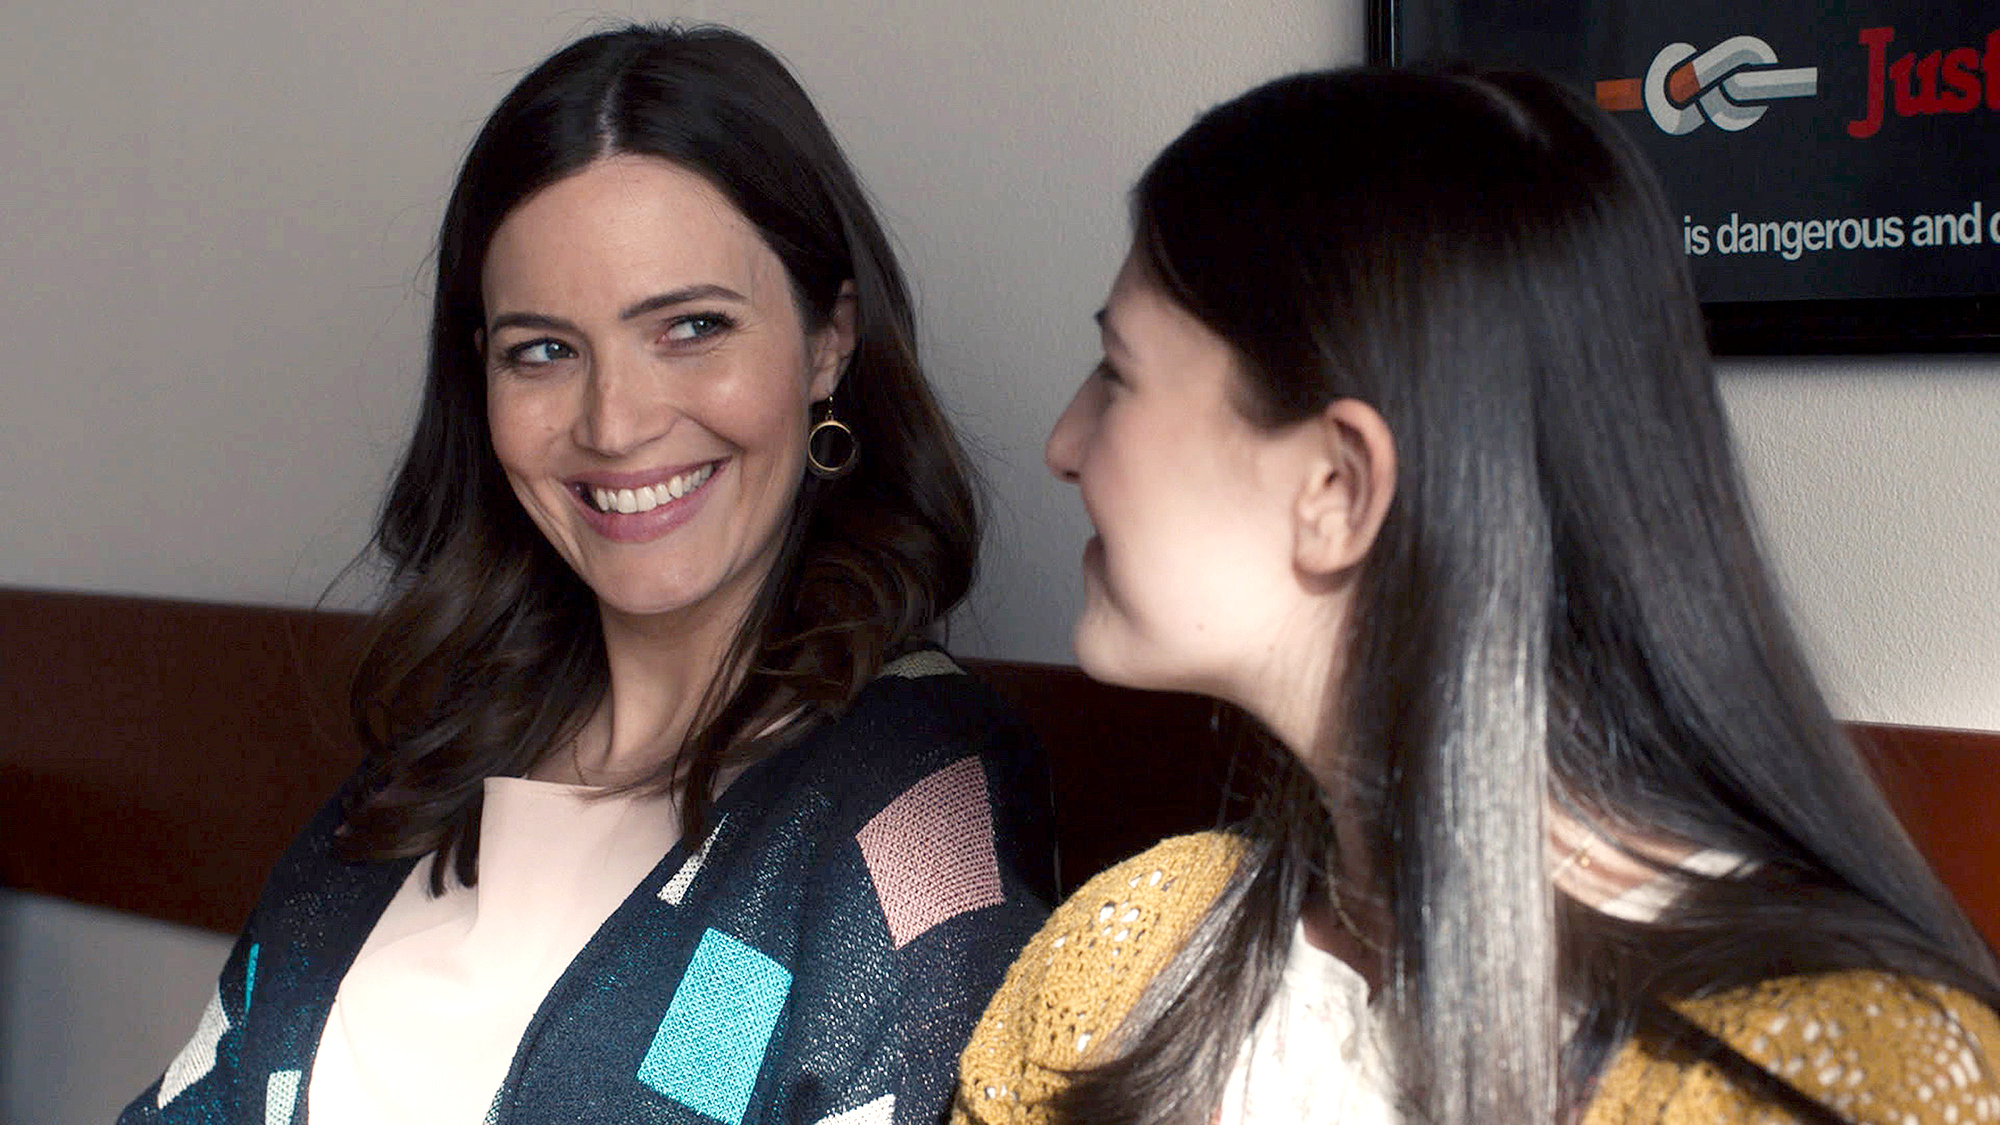 Mandy Moore Porn Shorts - How Pregnant Mandy Moore Is Hiding Baby Bump on 'This Is Us'